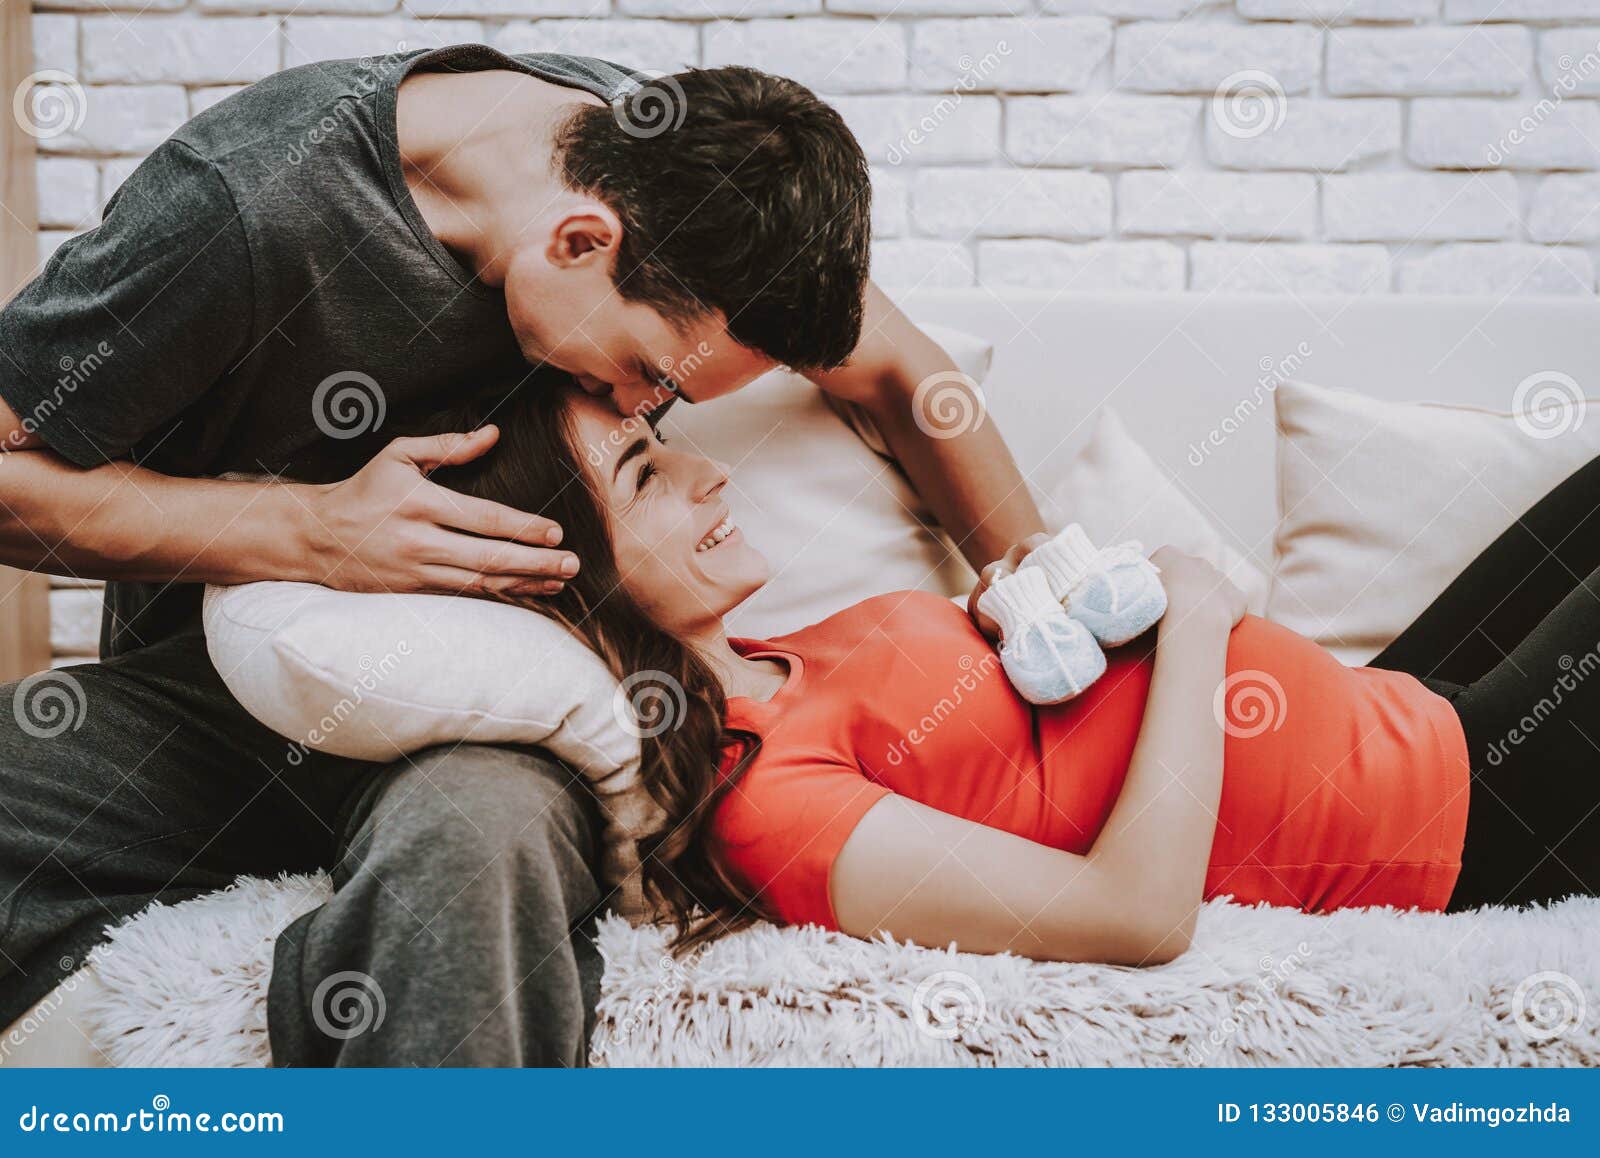 Husband and Pregnant Wife Relaxing on Couch Stock Photo picture